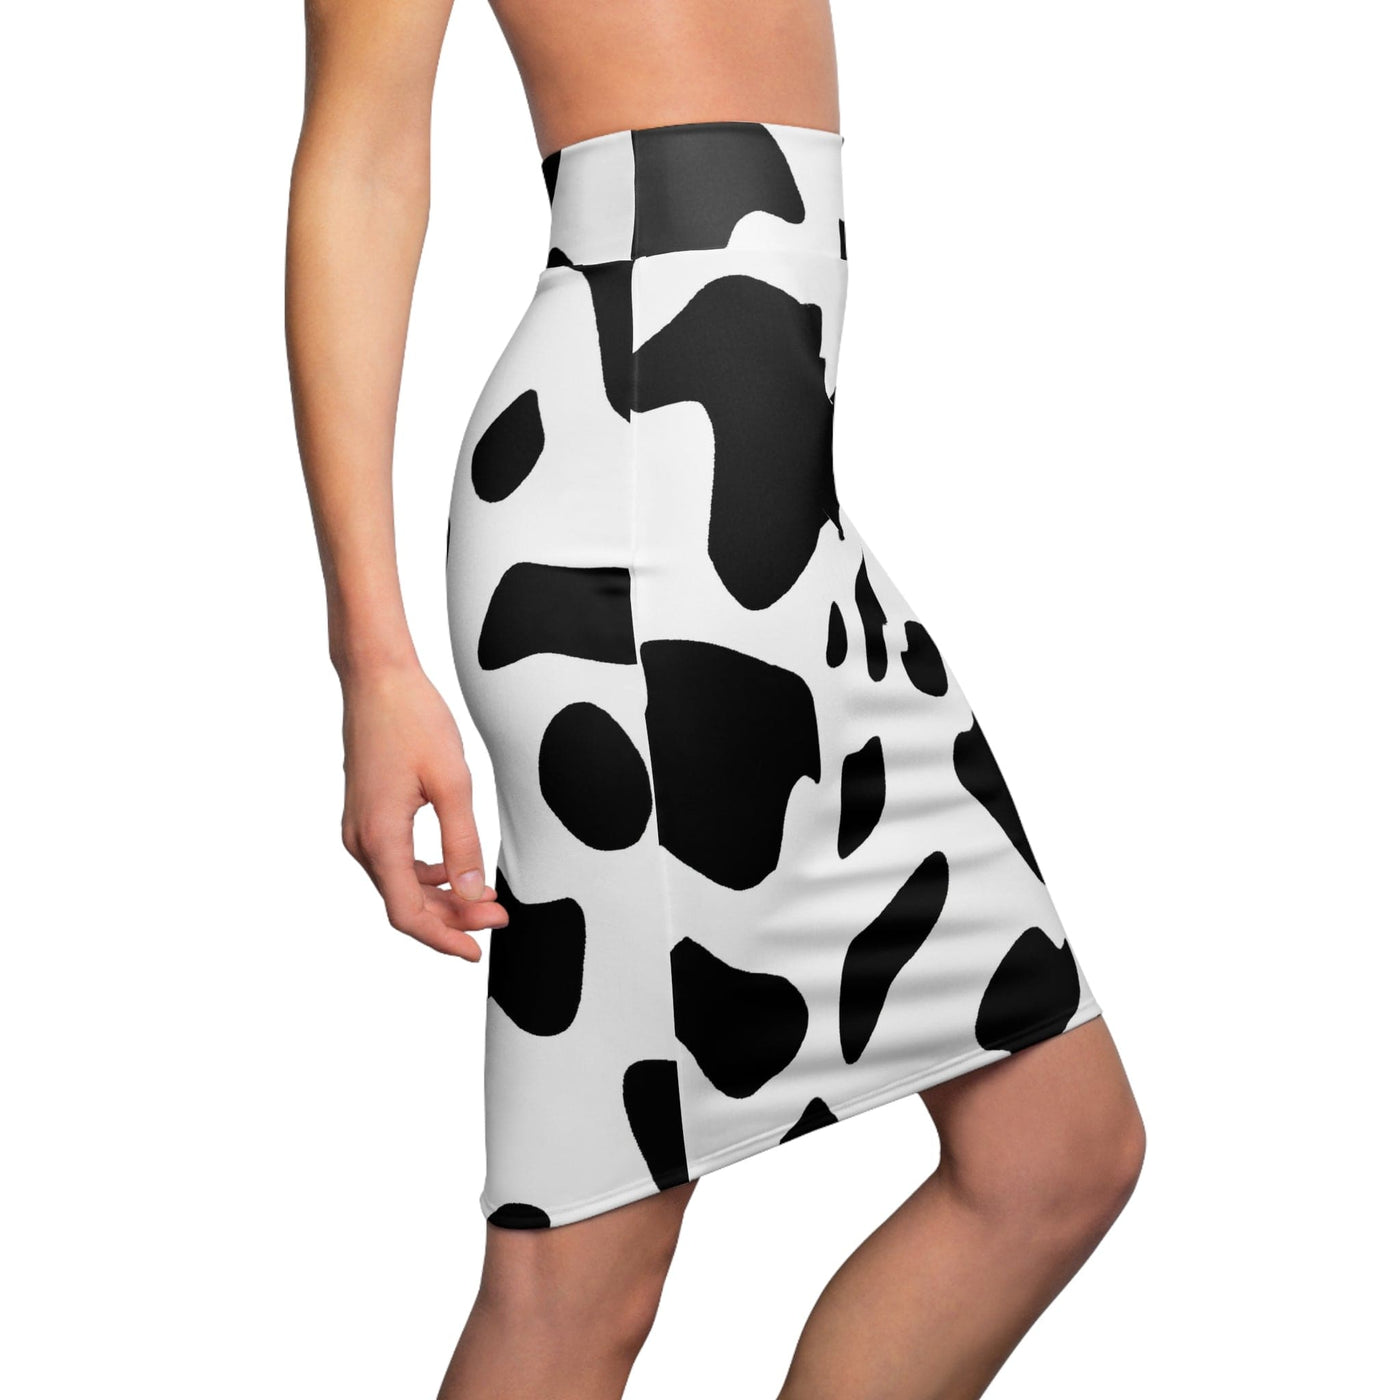 High Waist Womens Pencil Skirt - Contour Stretch - Black And White Abstract Cow